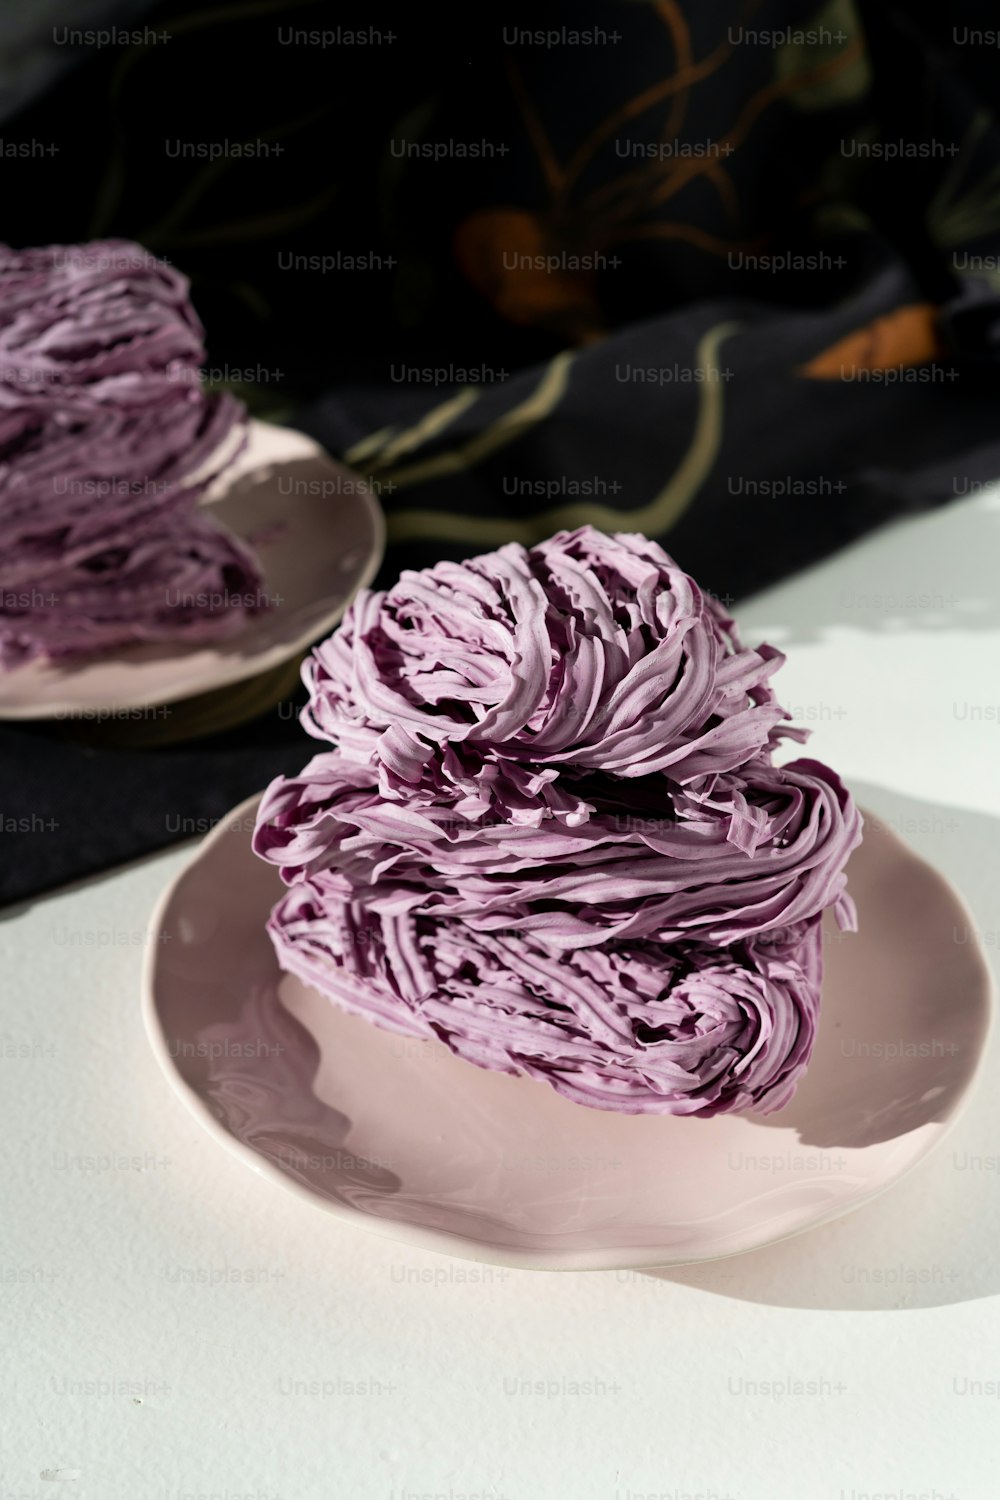 a plate of purple cake sitting on a table